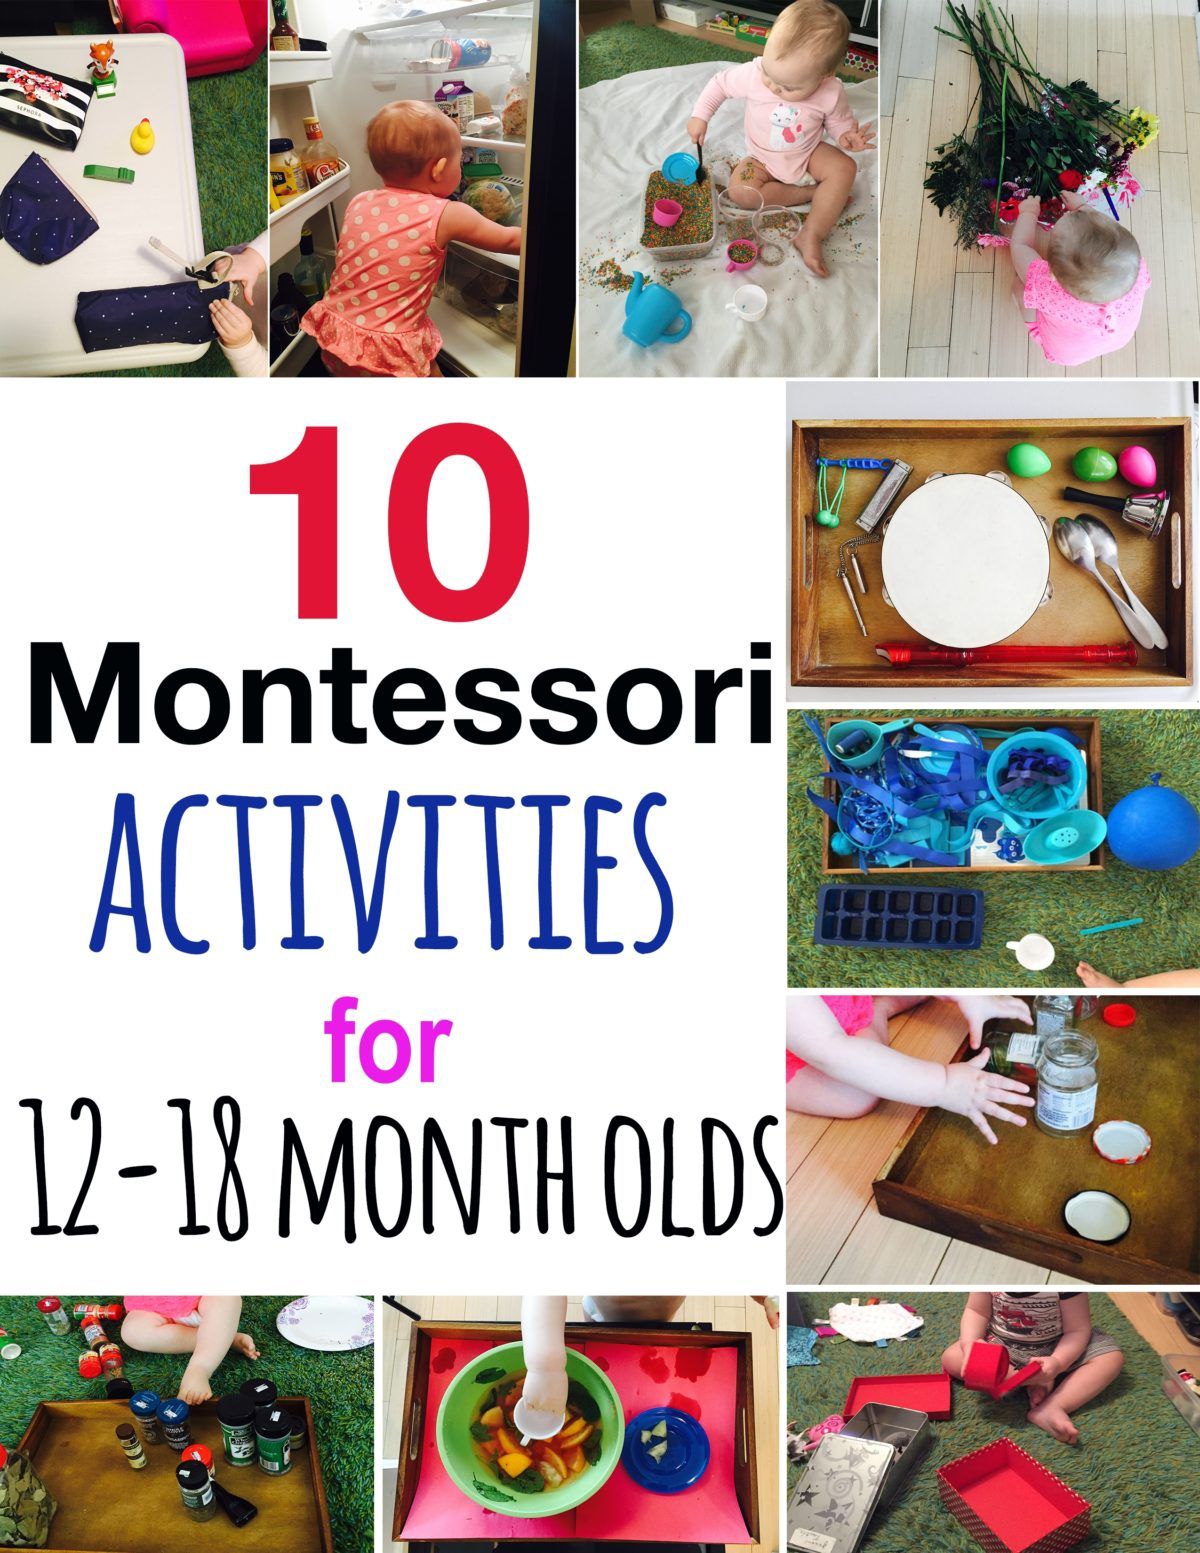 Montessori activities for 14-month-old